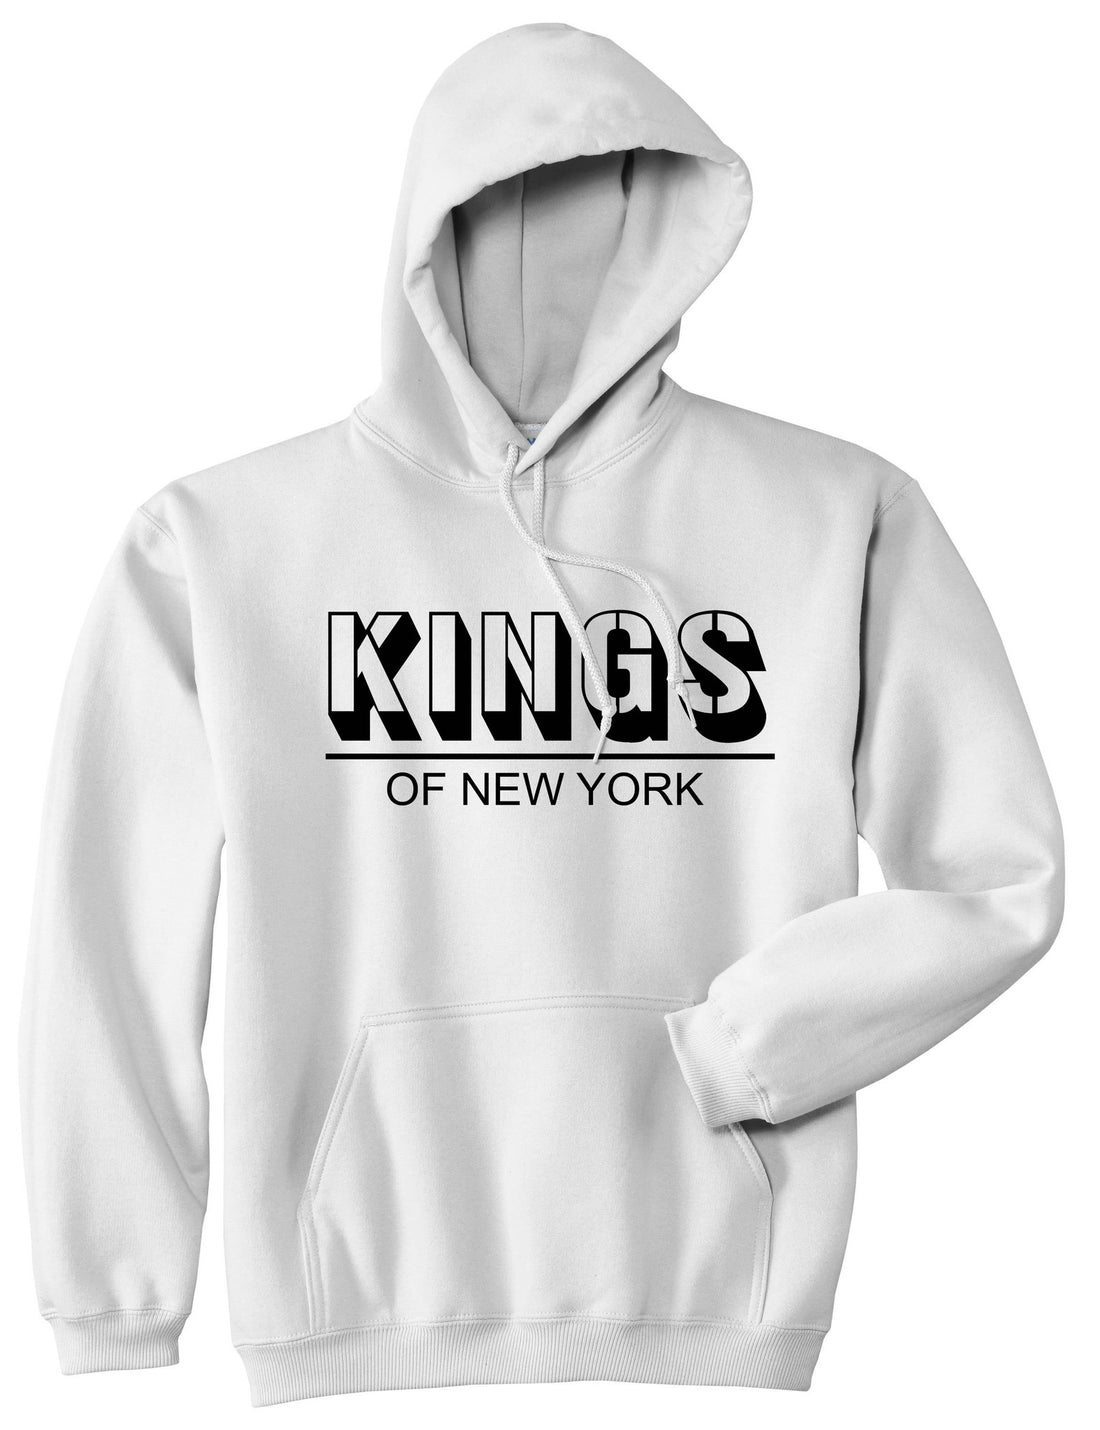 King Branded Block Letters Pullover Hoodie Hoody in White by Kings Of NY